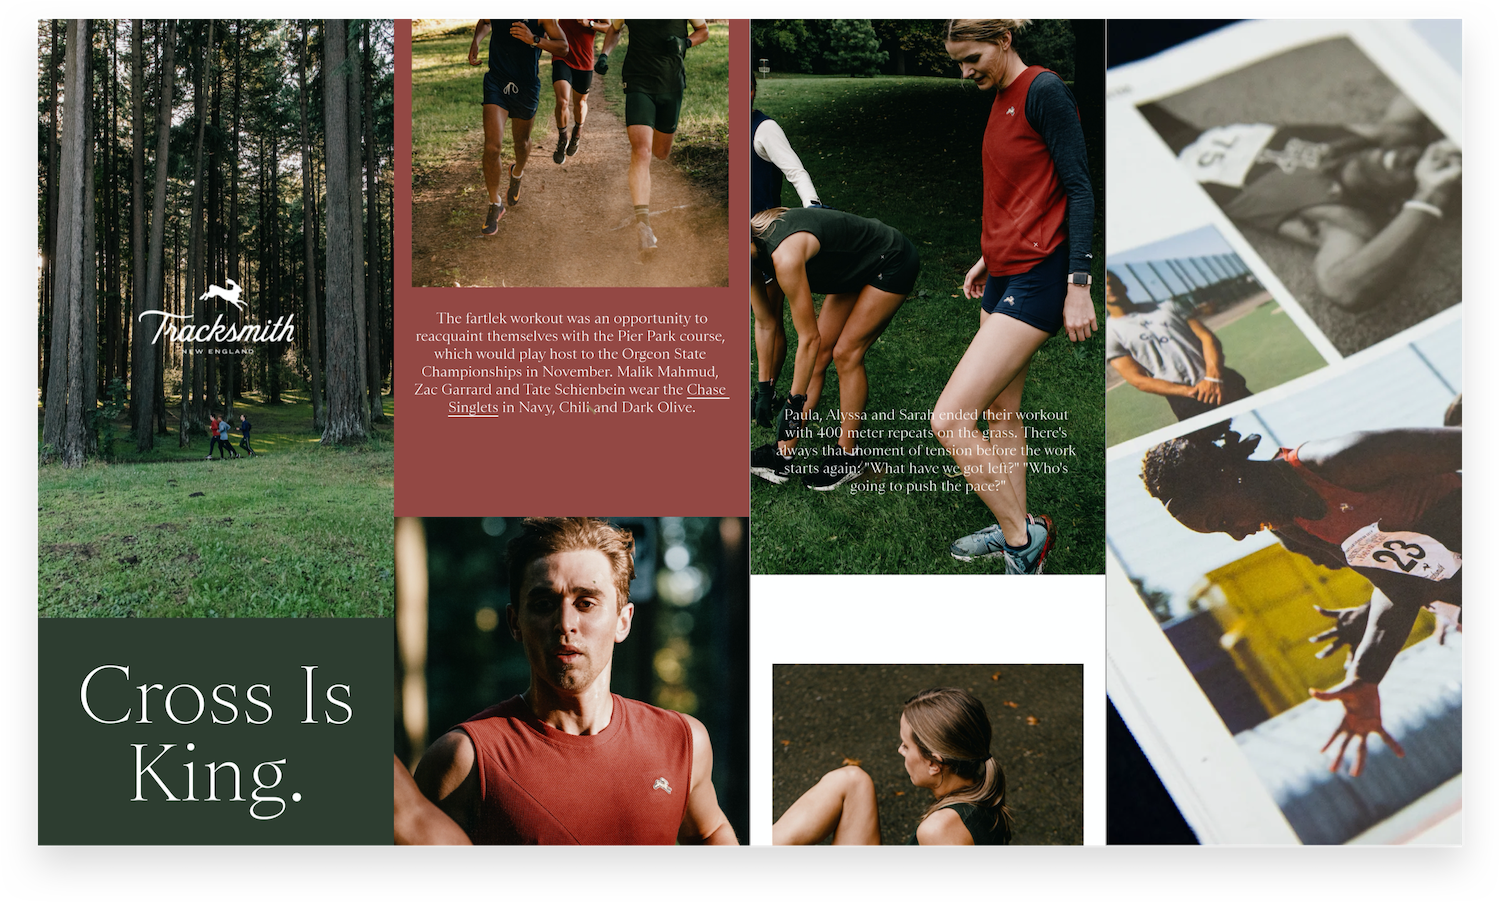 Tracksmith Content Collage of Product Launches, Blogs, and Print Magazine